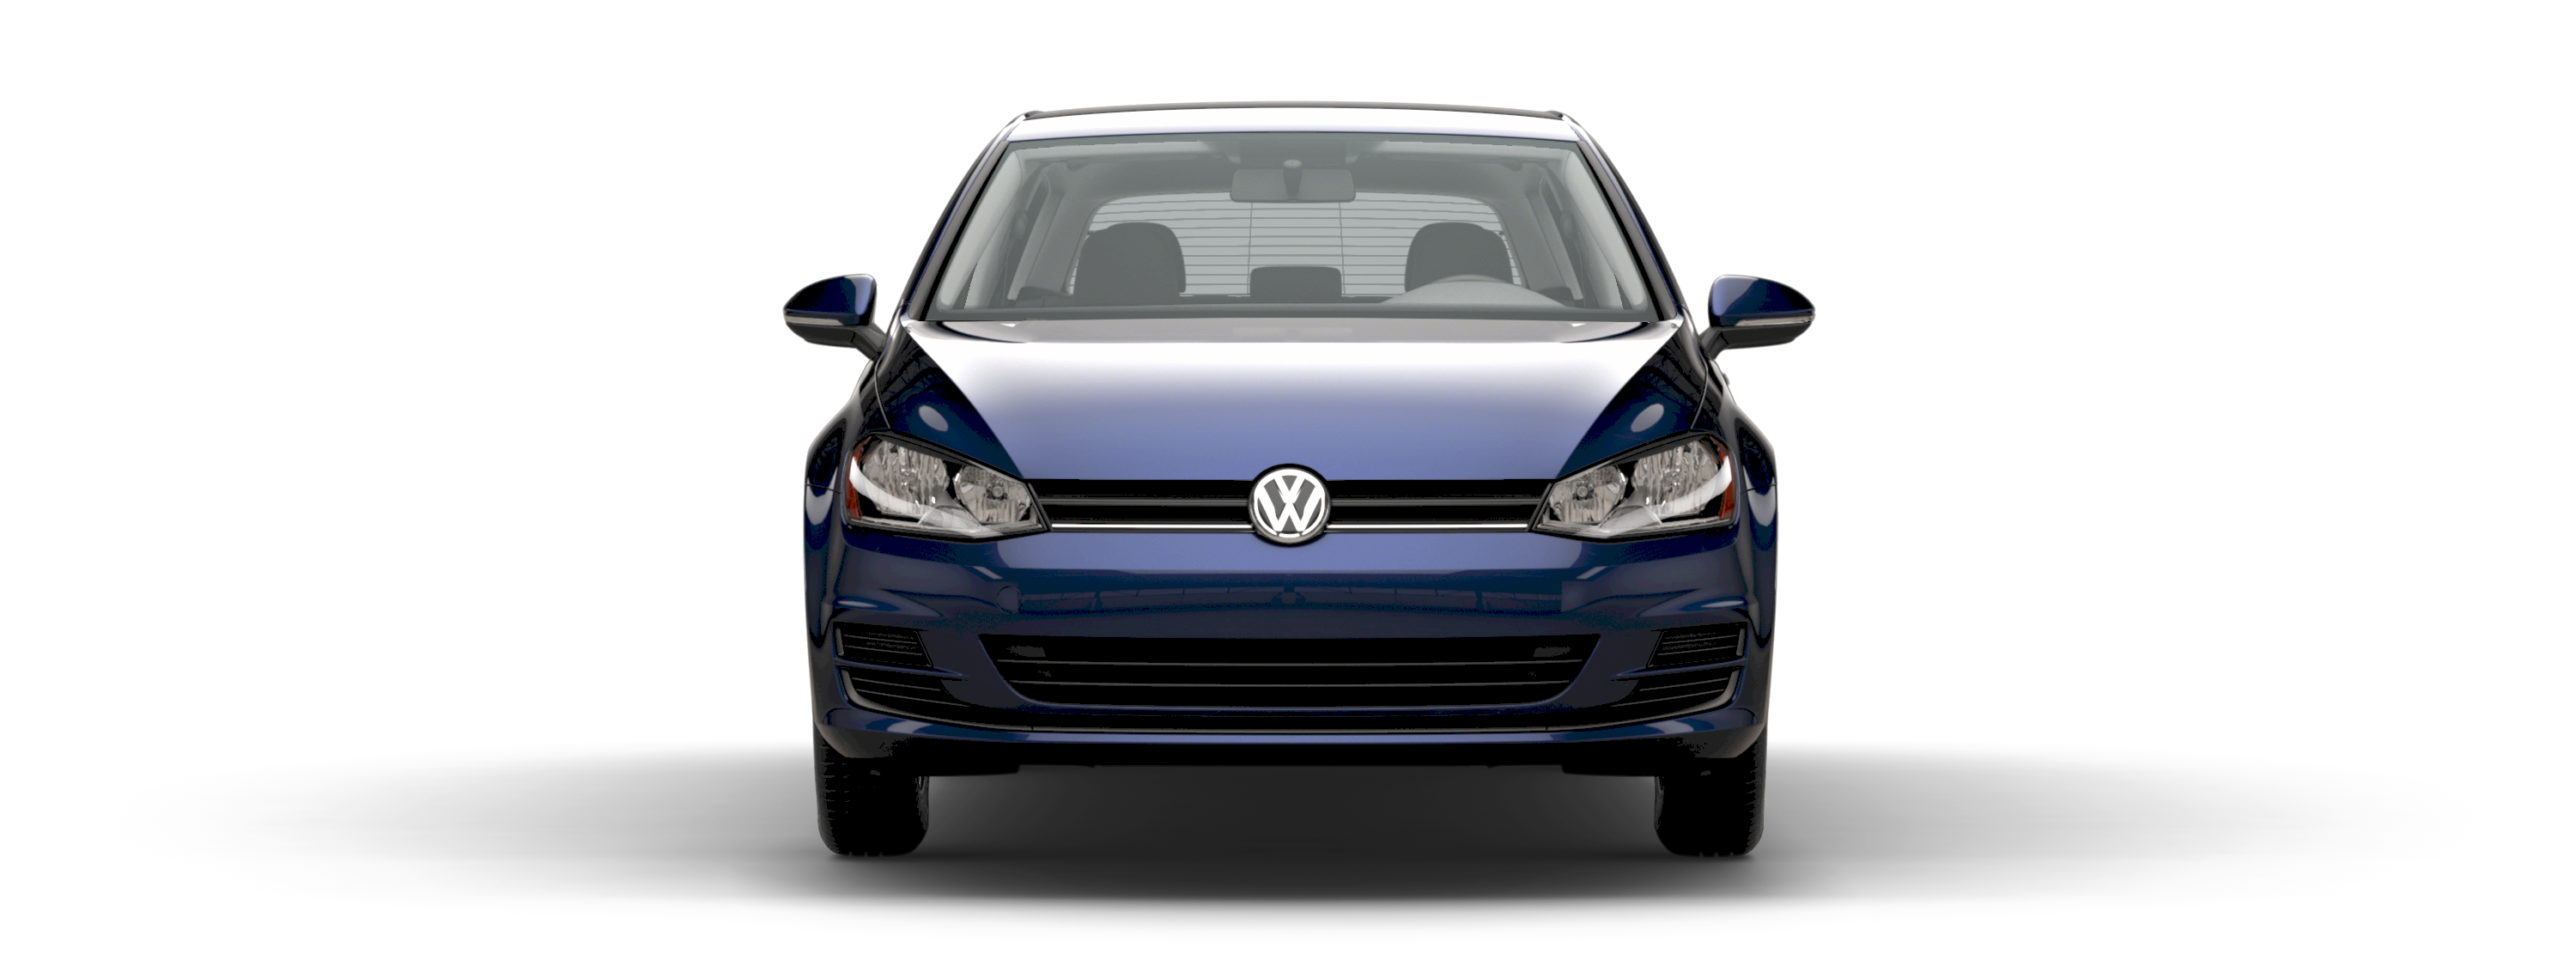 Volkswagen Golf S With Sunroof front view